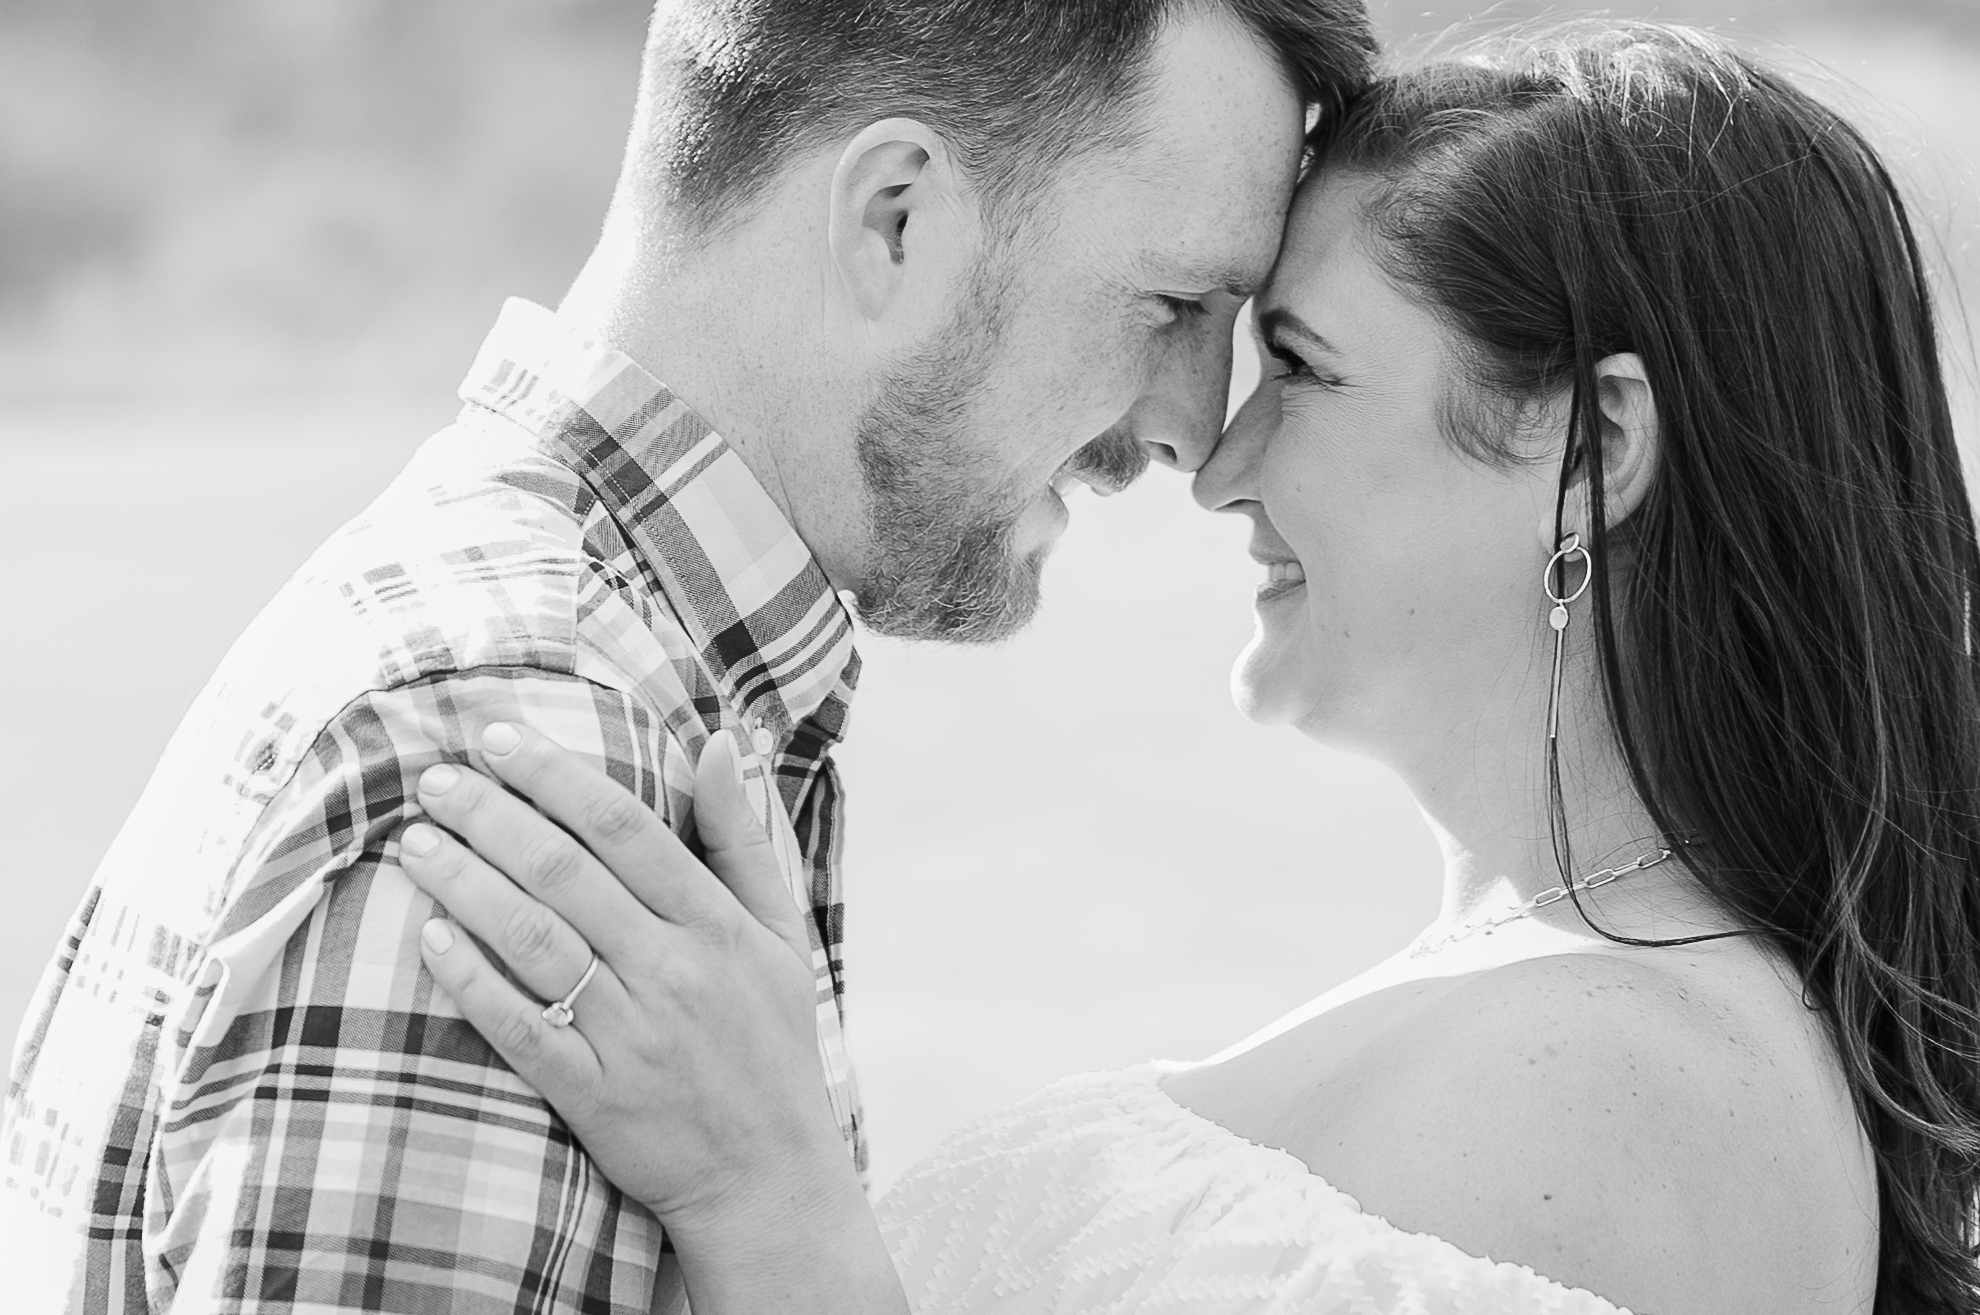 Bride and Groom stand embracing with forheads touching at engagement photos